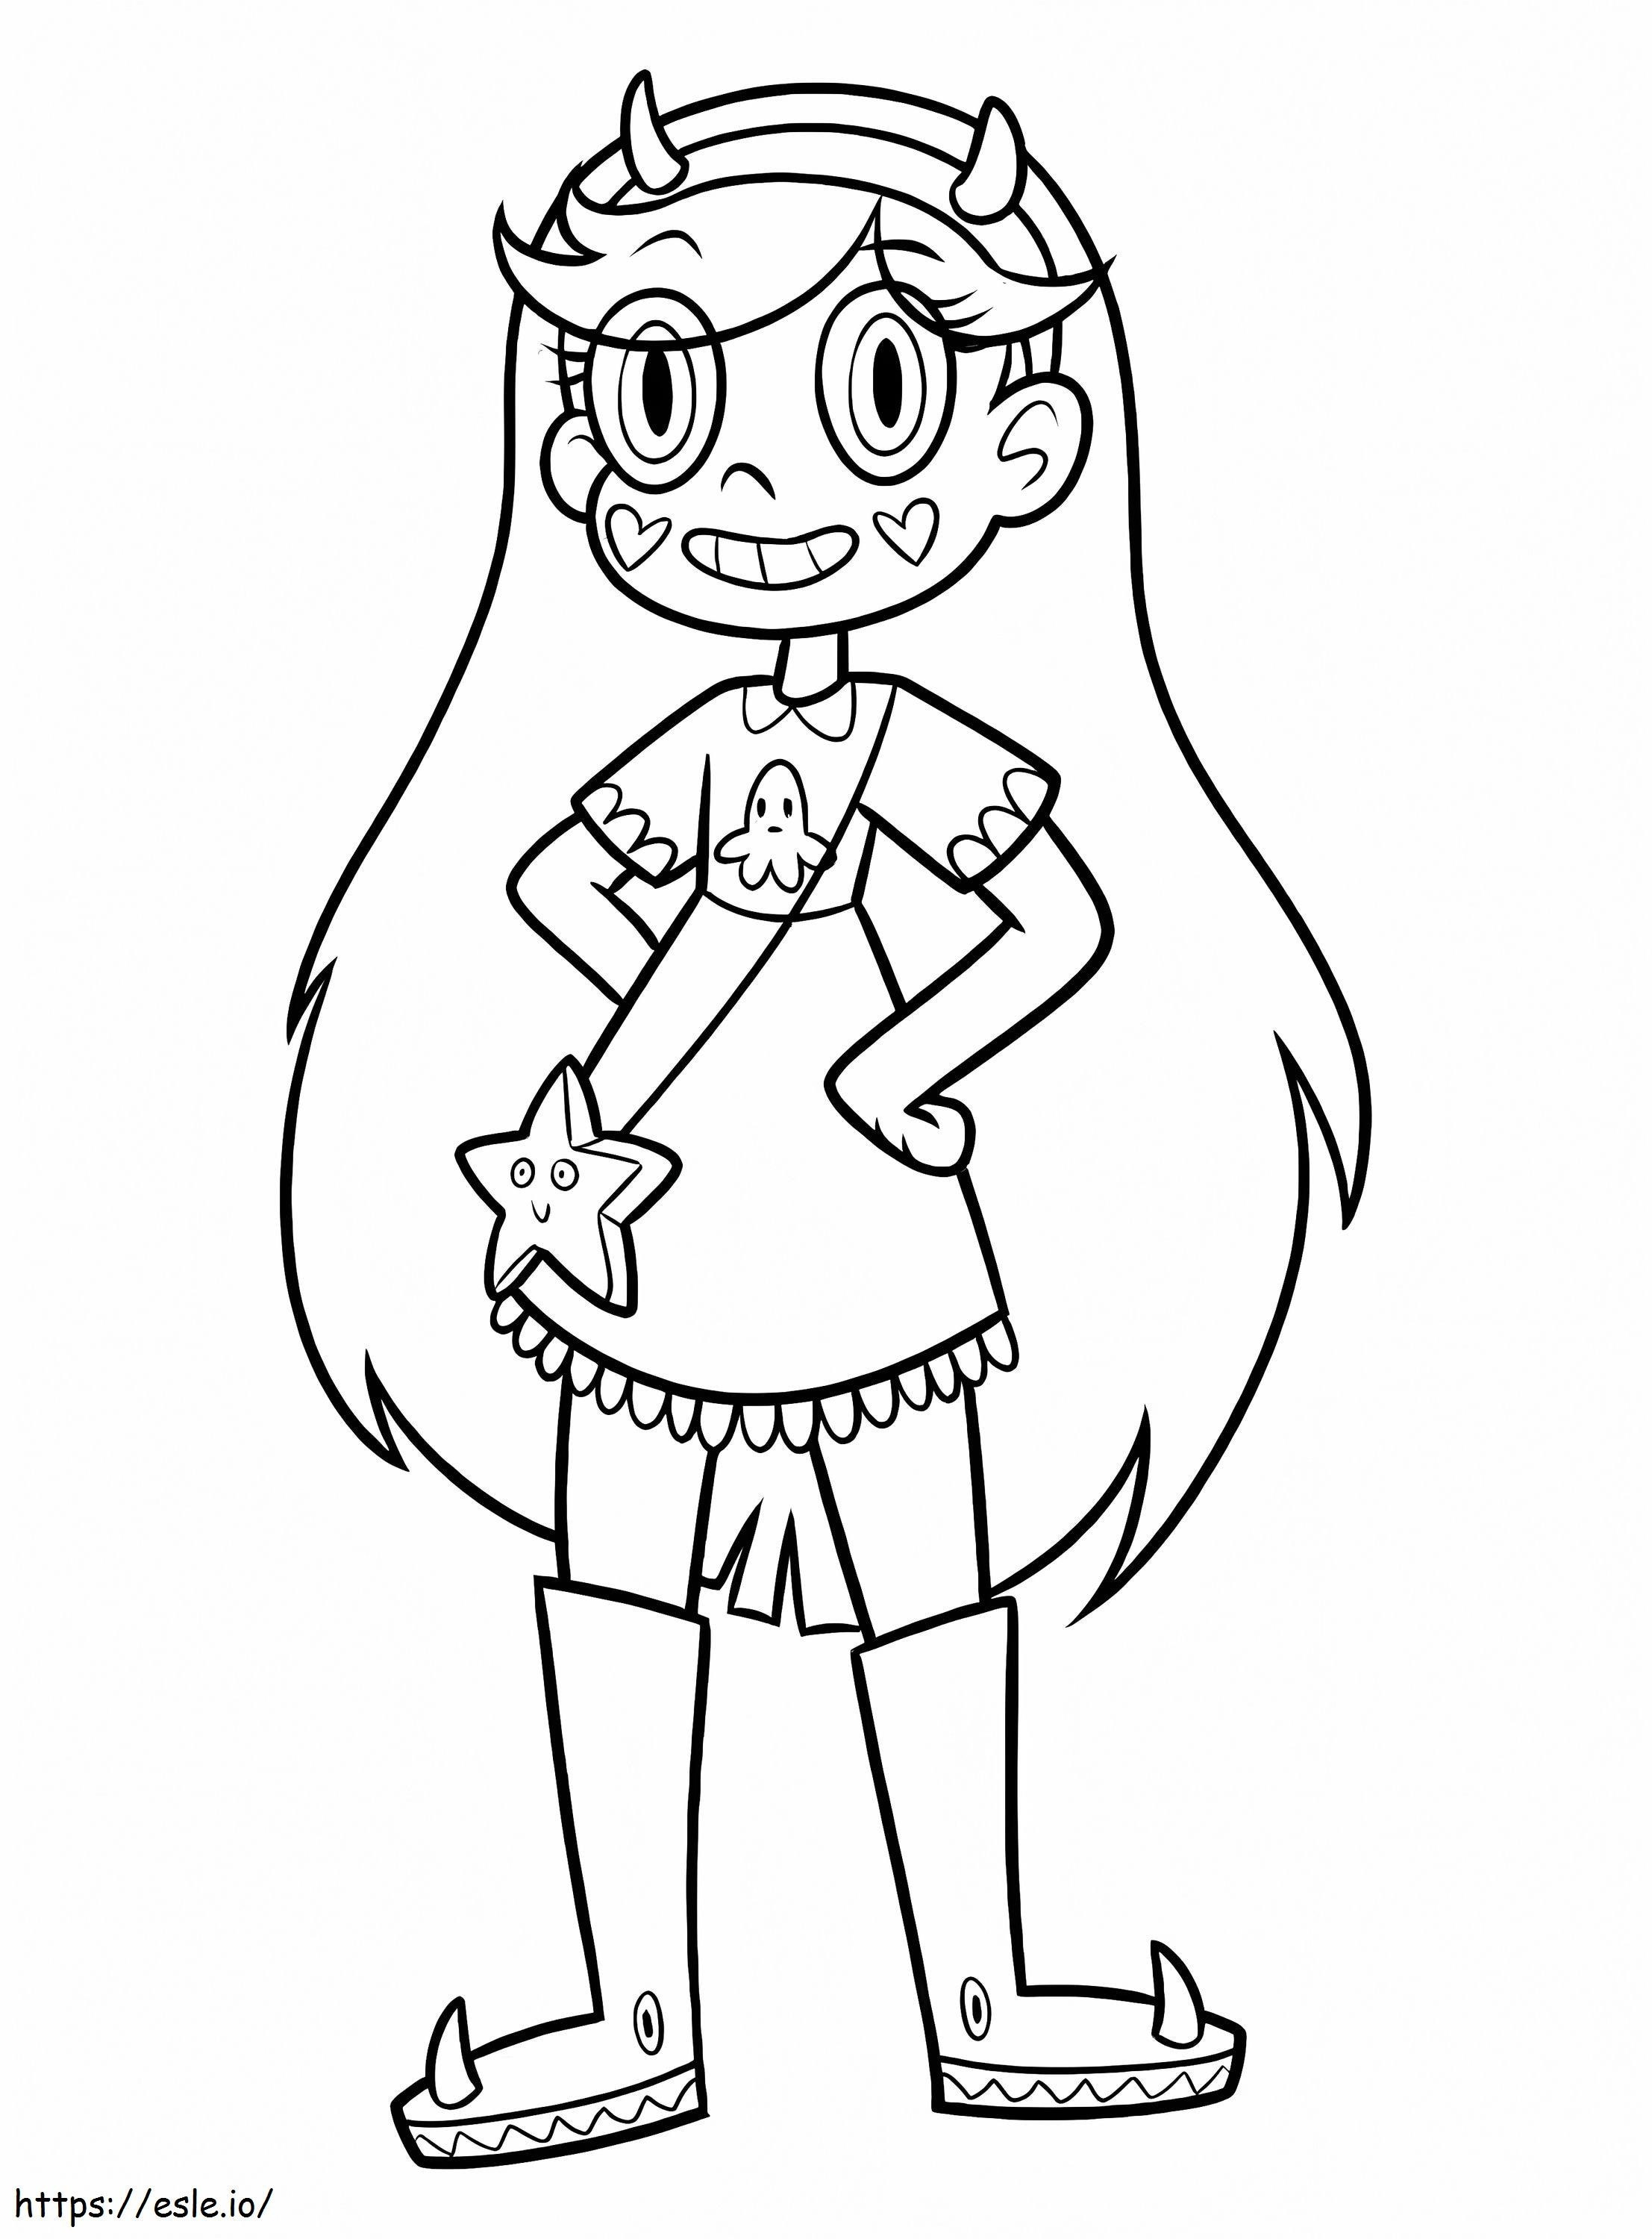 Star Butterfly Smiling coloring page